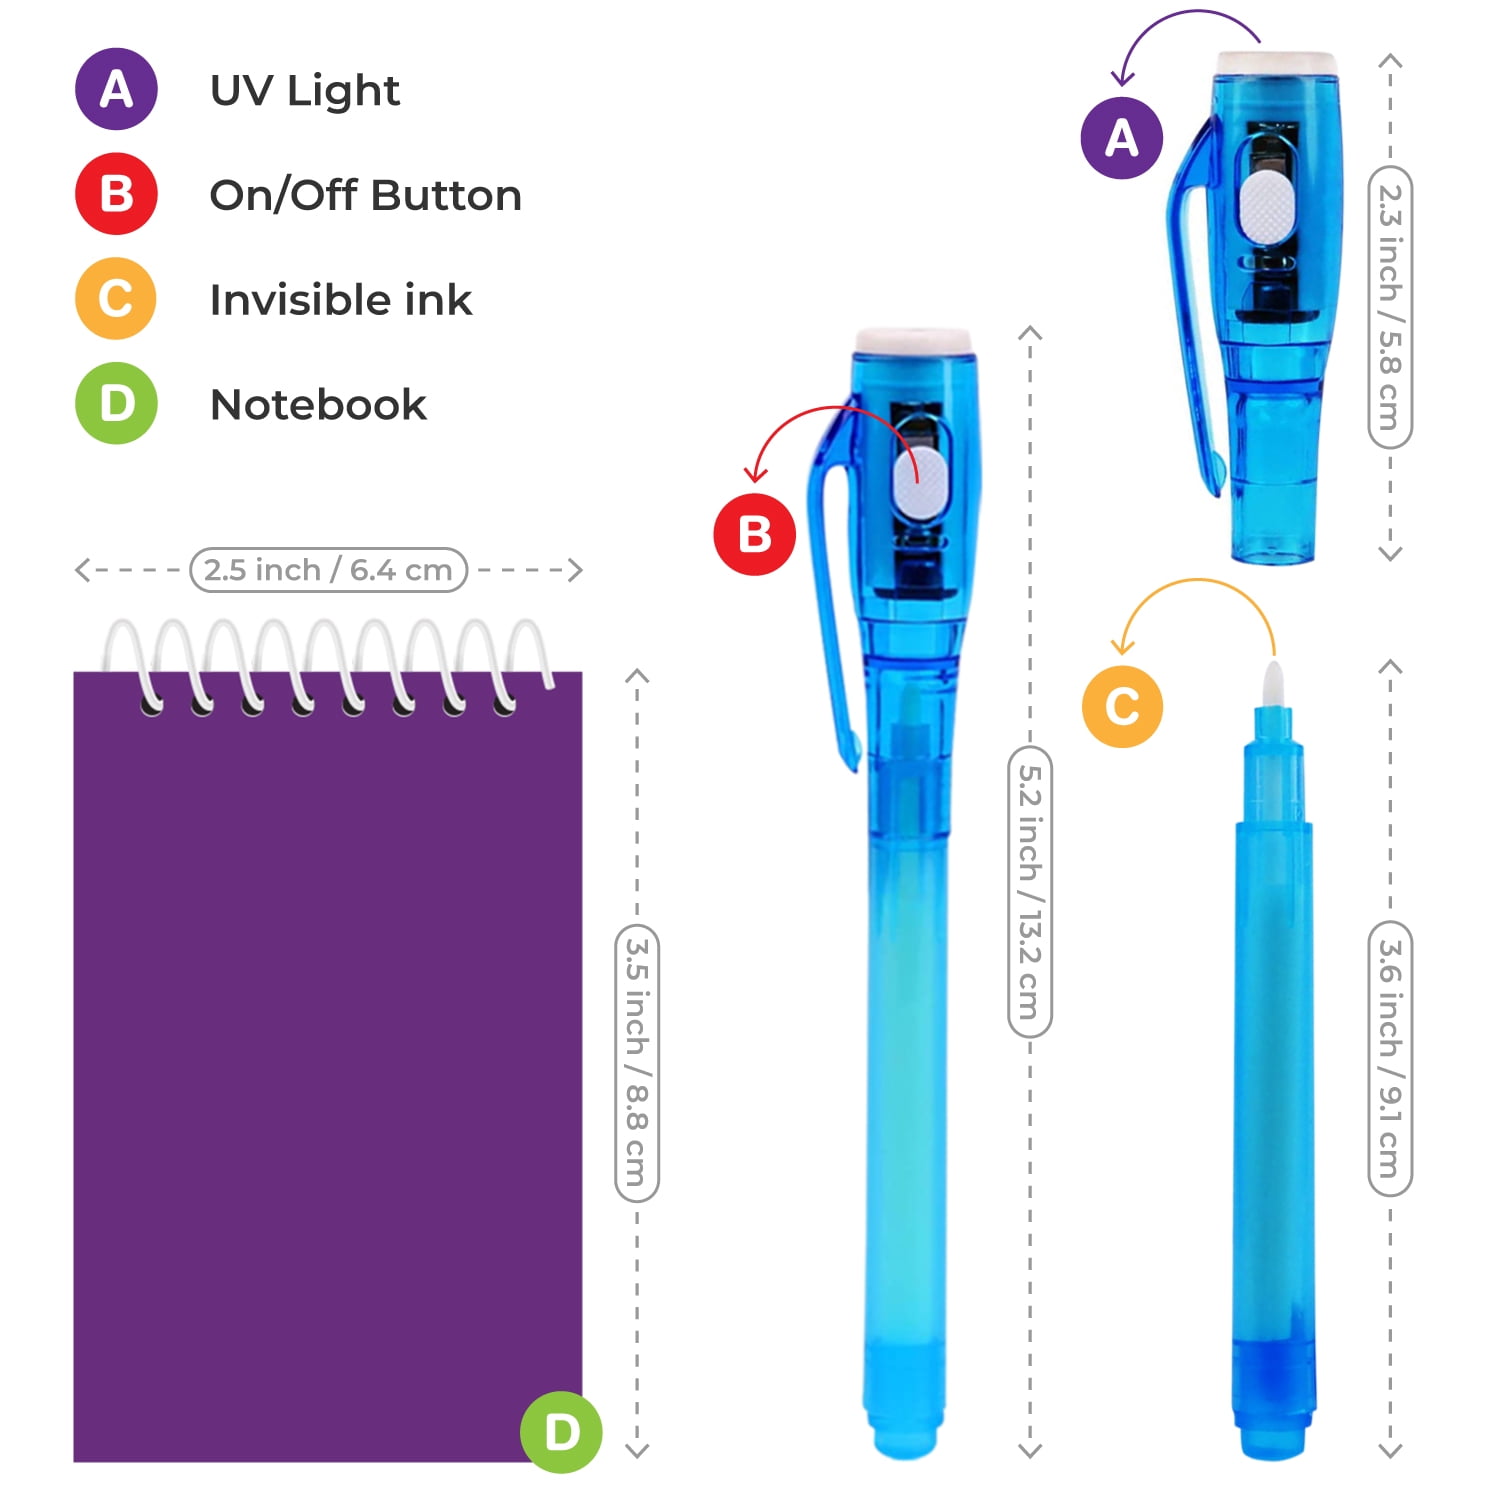 GIFTINBOX Invisible Ink Pen with UV Light for Kids, 24PCS Spy Pen Party  Favors for Kids 8-12, Magic Marker for Secret Message, School Supplies